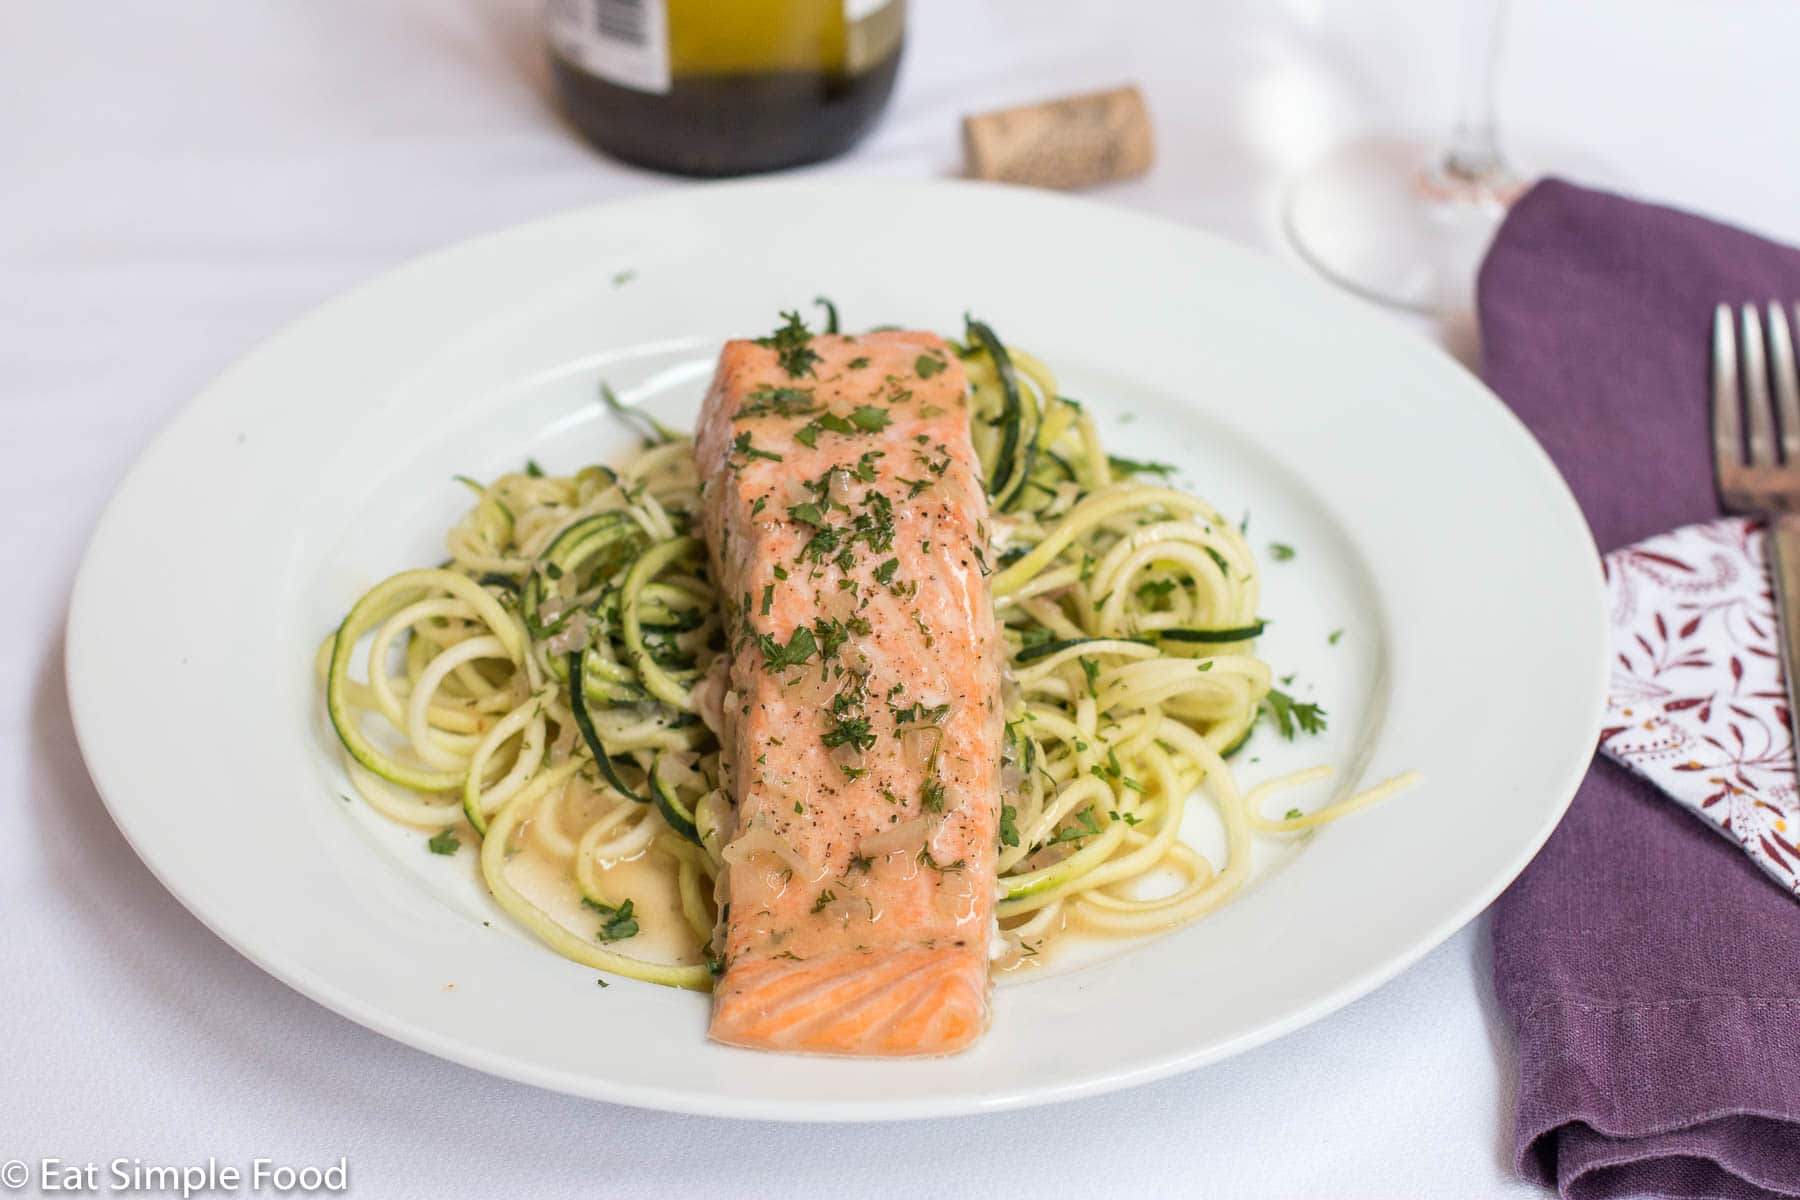 Salmon filet on a white plate on top of zucchini noodles with parsley and caper garnish. wine in back drop with white table cloth.